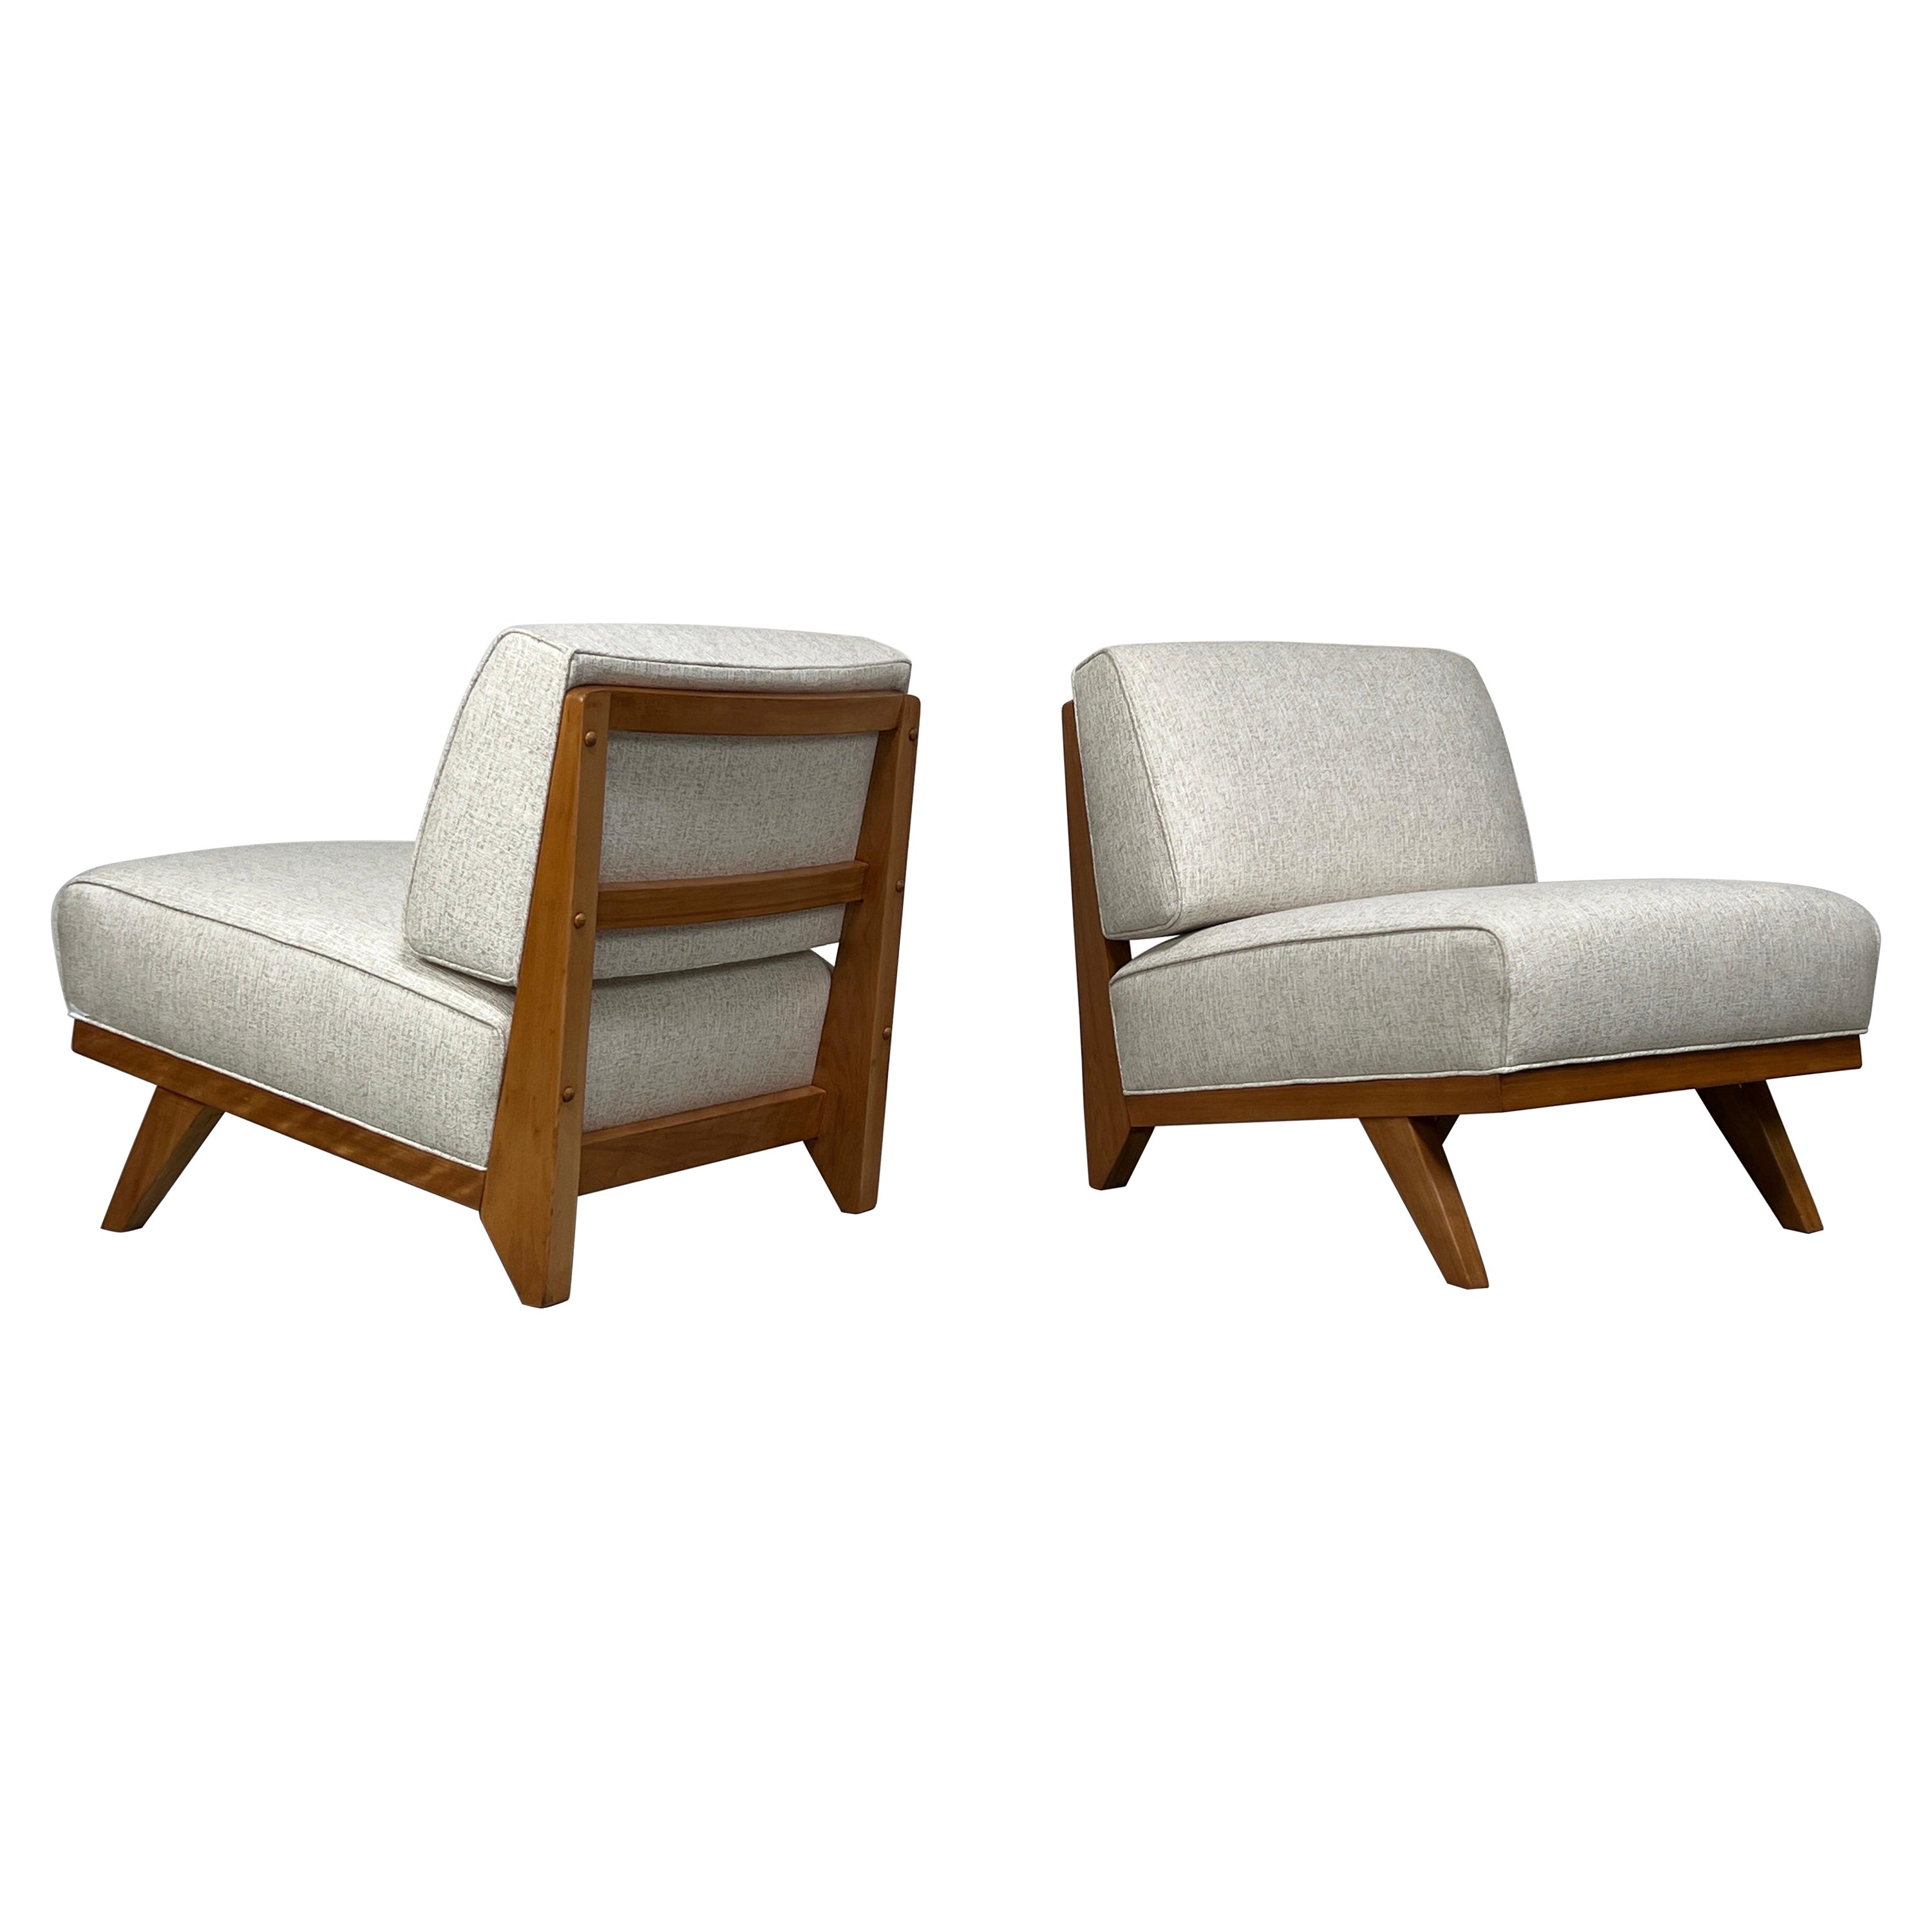 Pair of Lounge Chairs by Abel Sorensen for Knoll